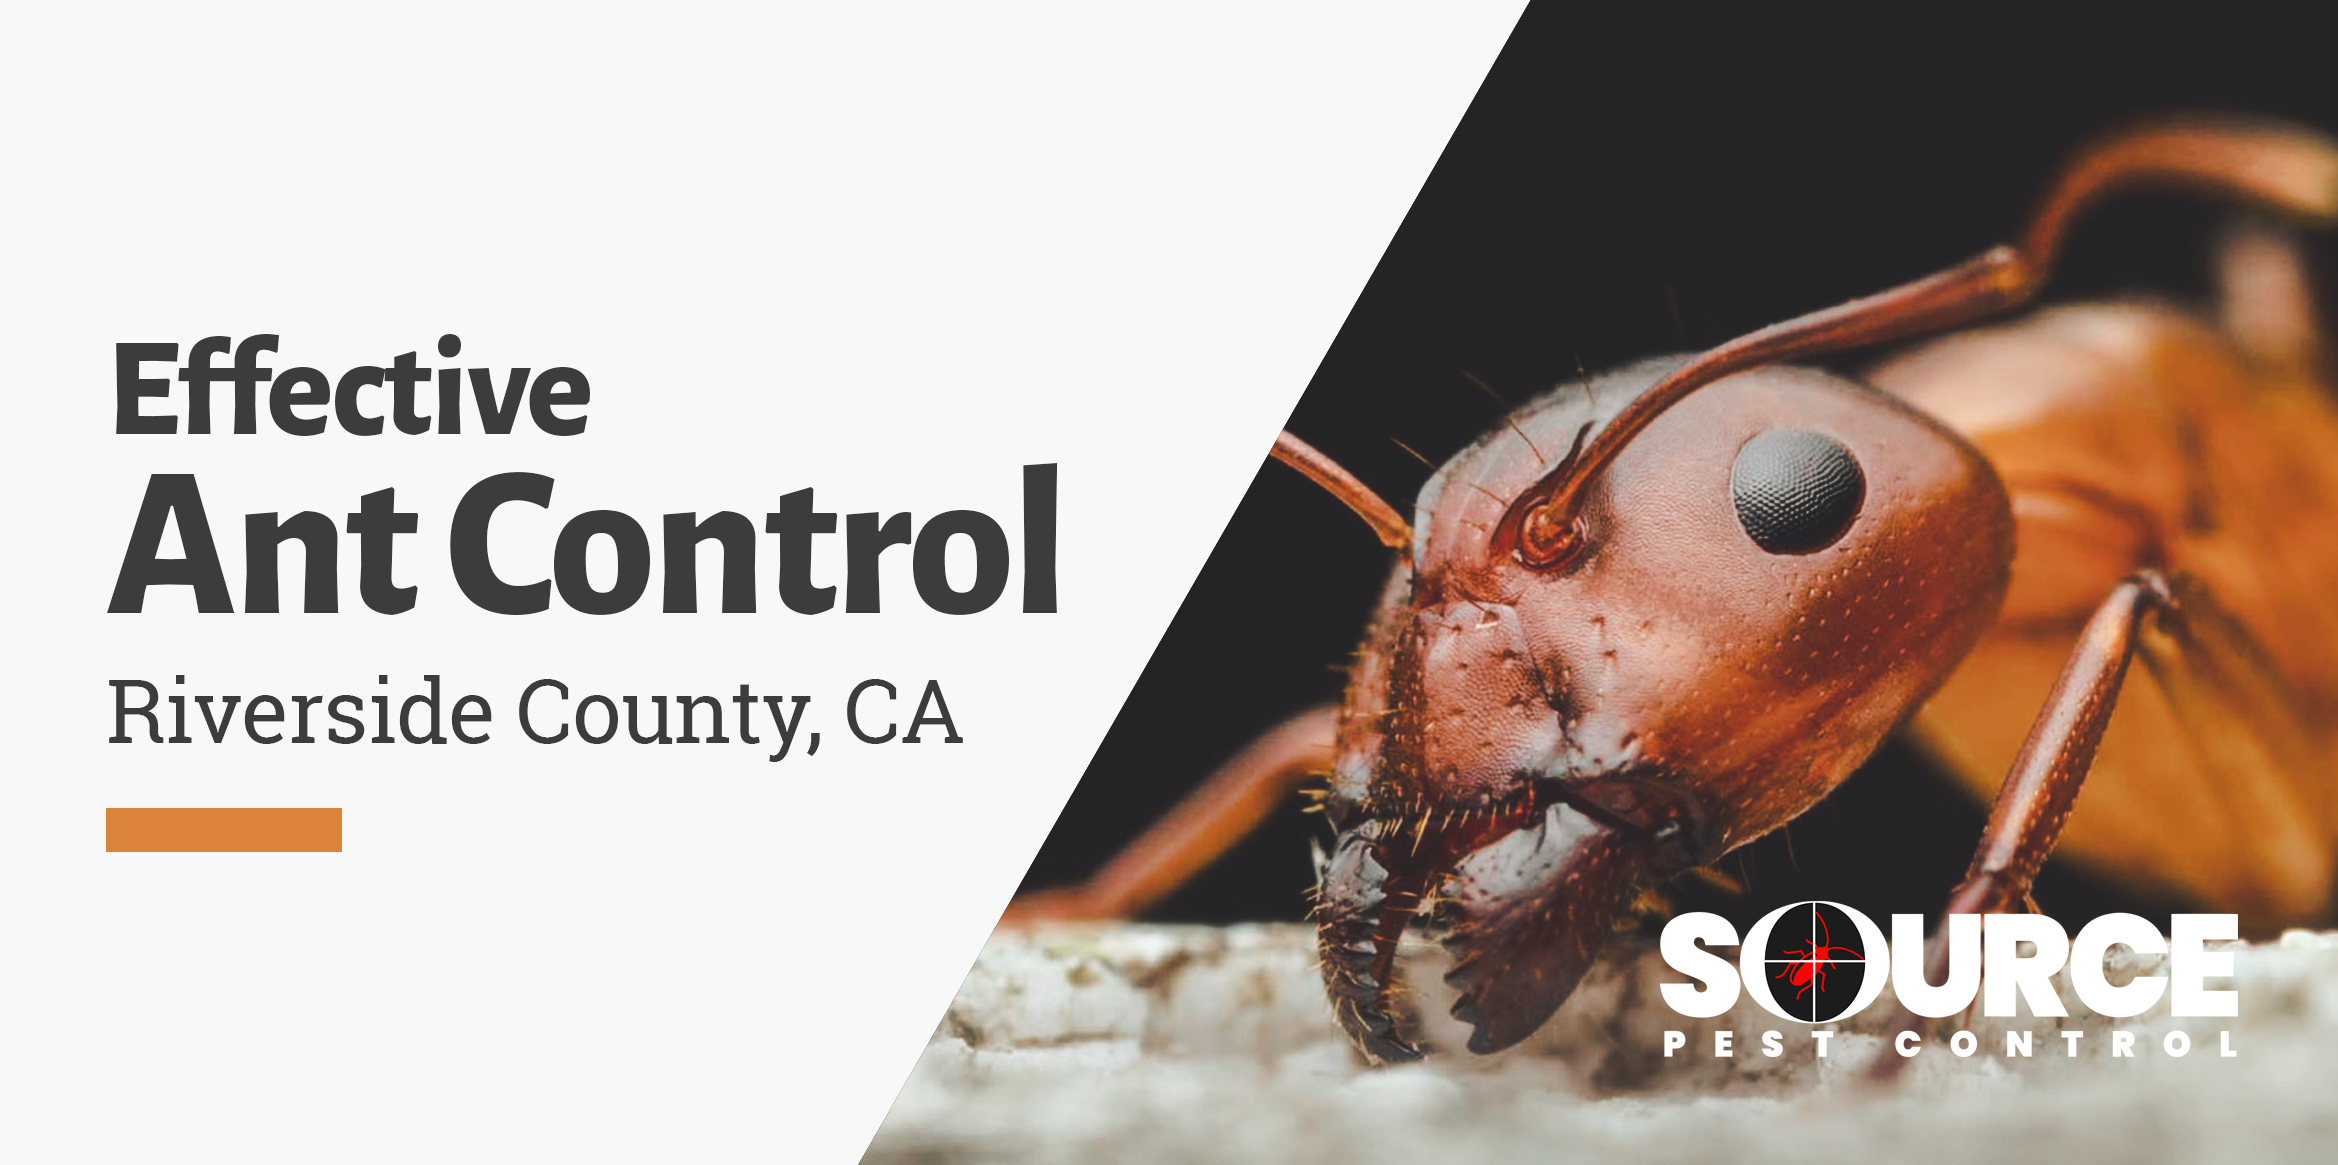 ant control in riverside county, ca